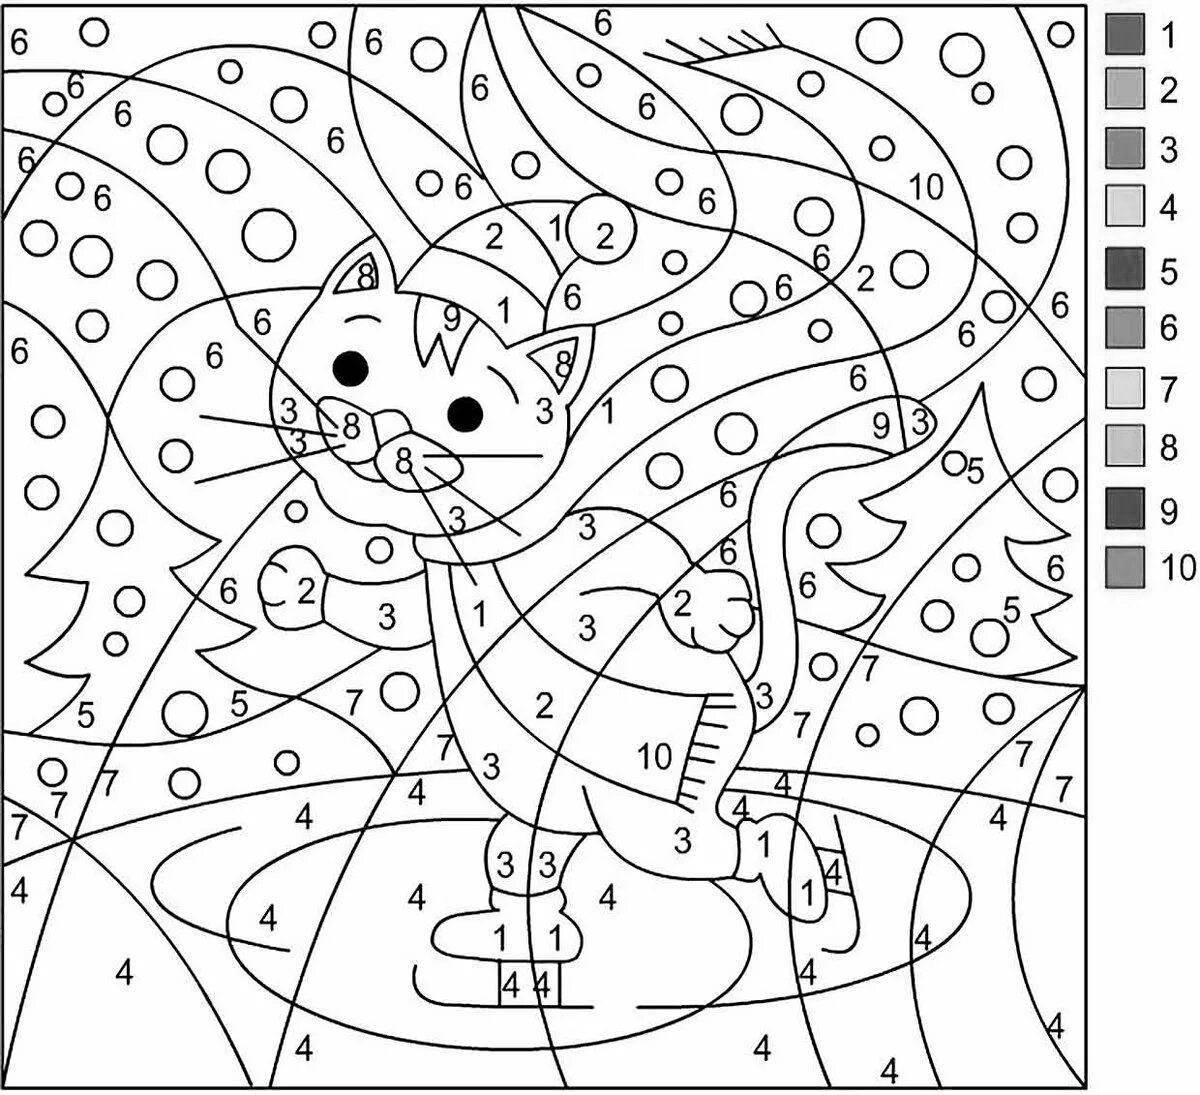 Color digital coloring book for children 6-7 years old